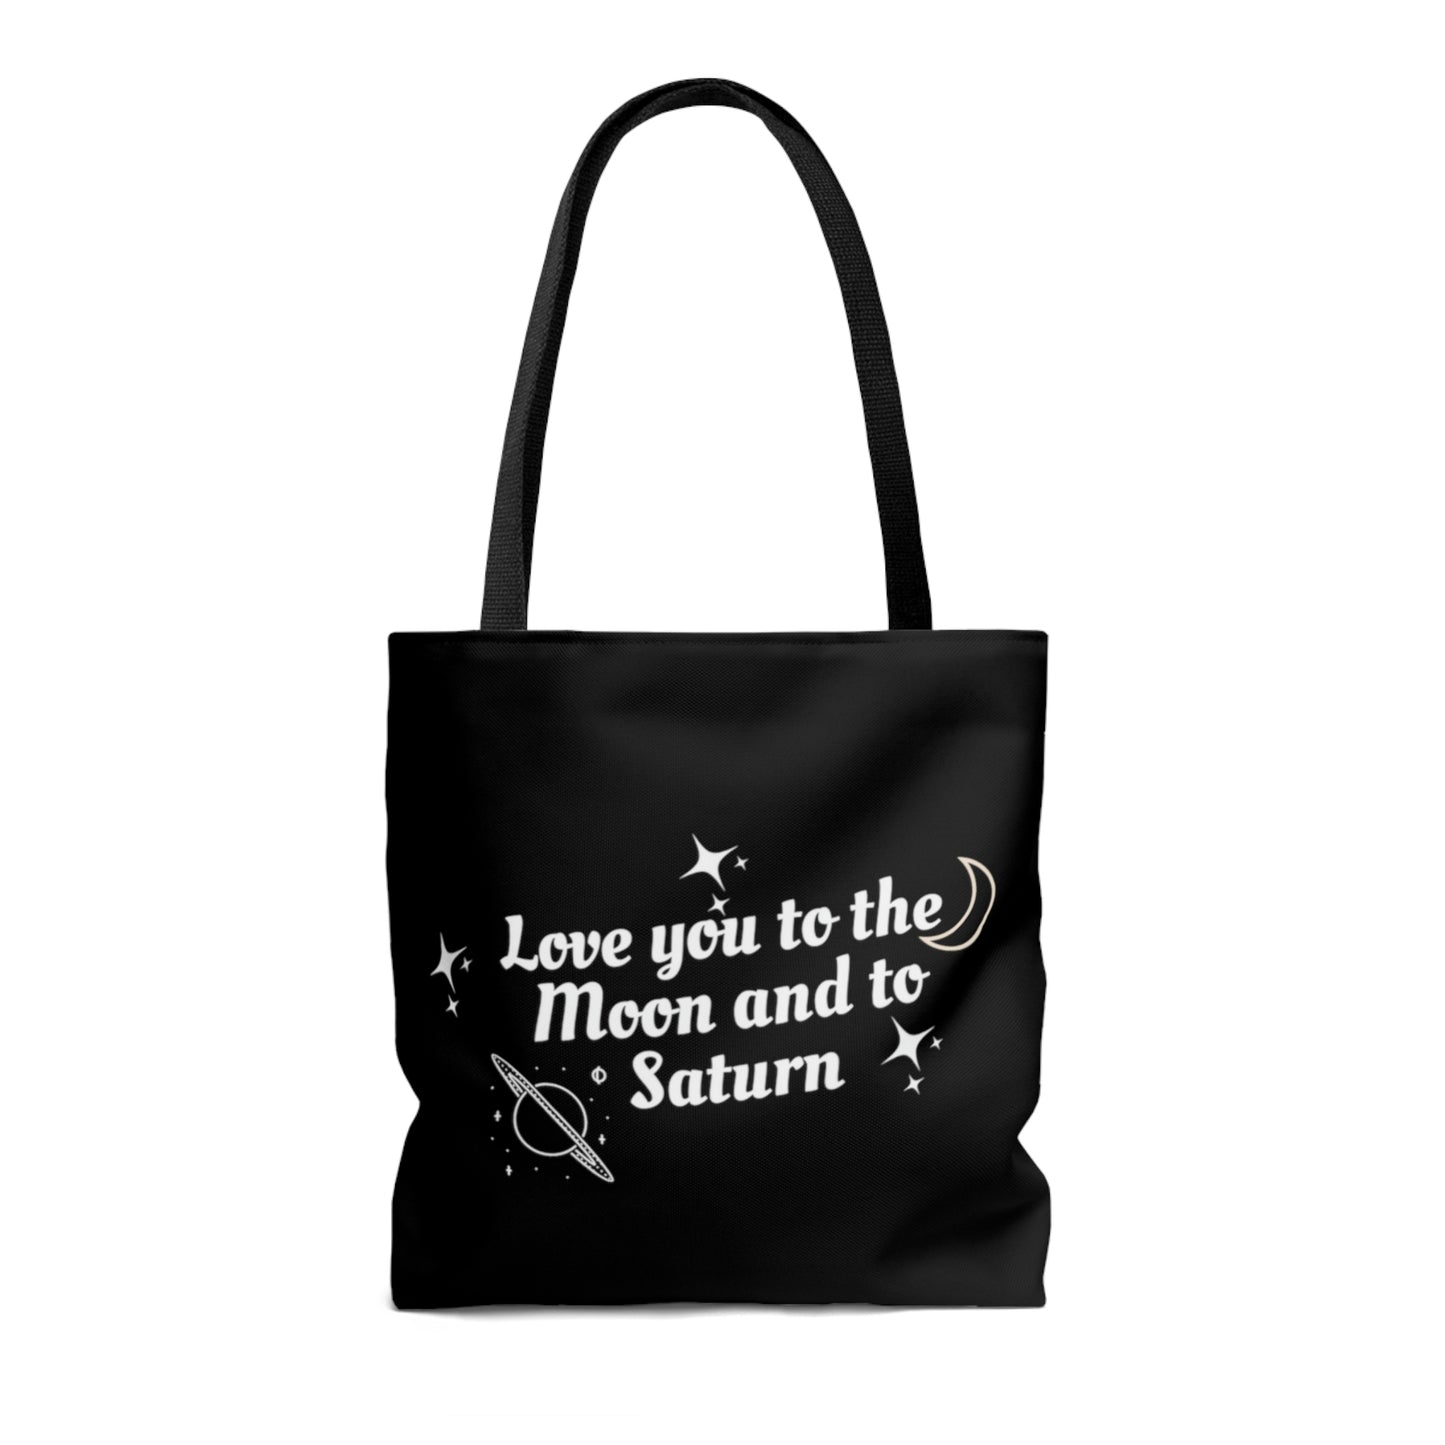 Love You to the Moon & Saturn, Fan Tote Bag